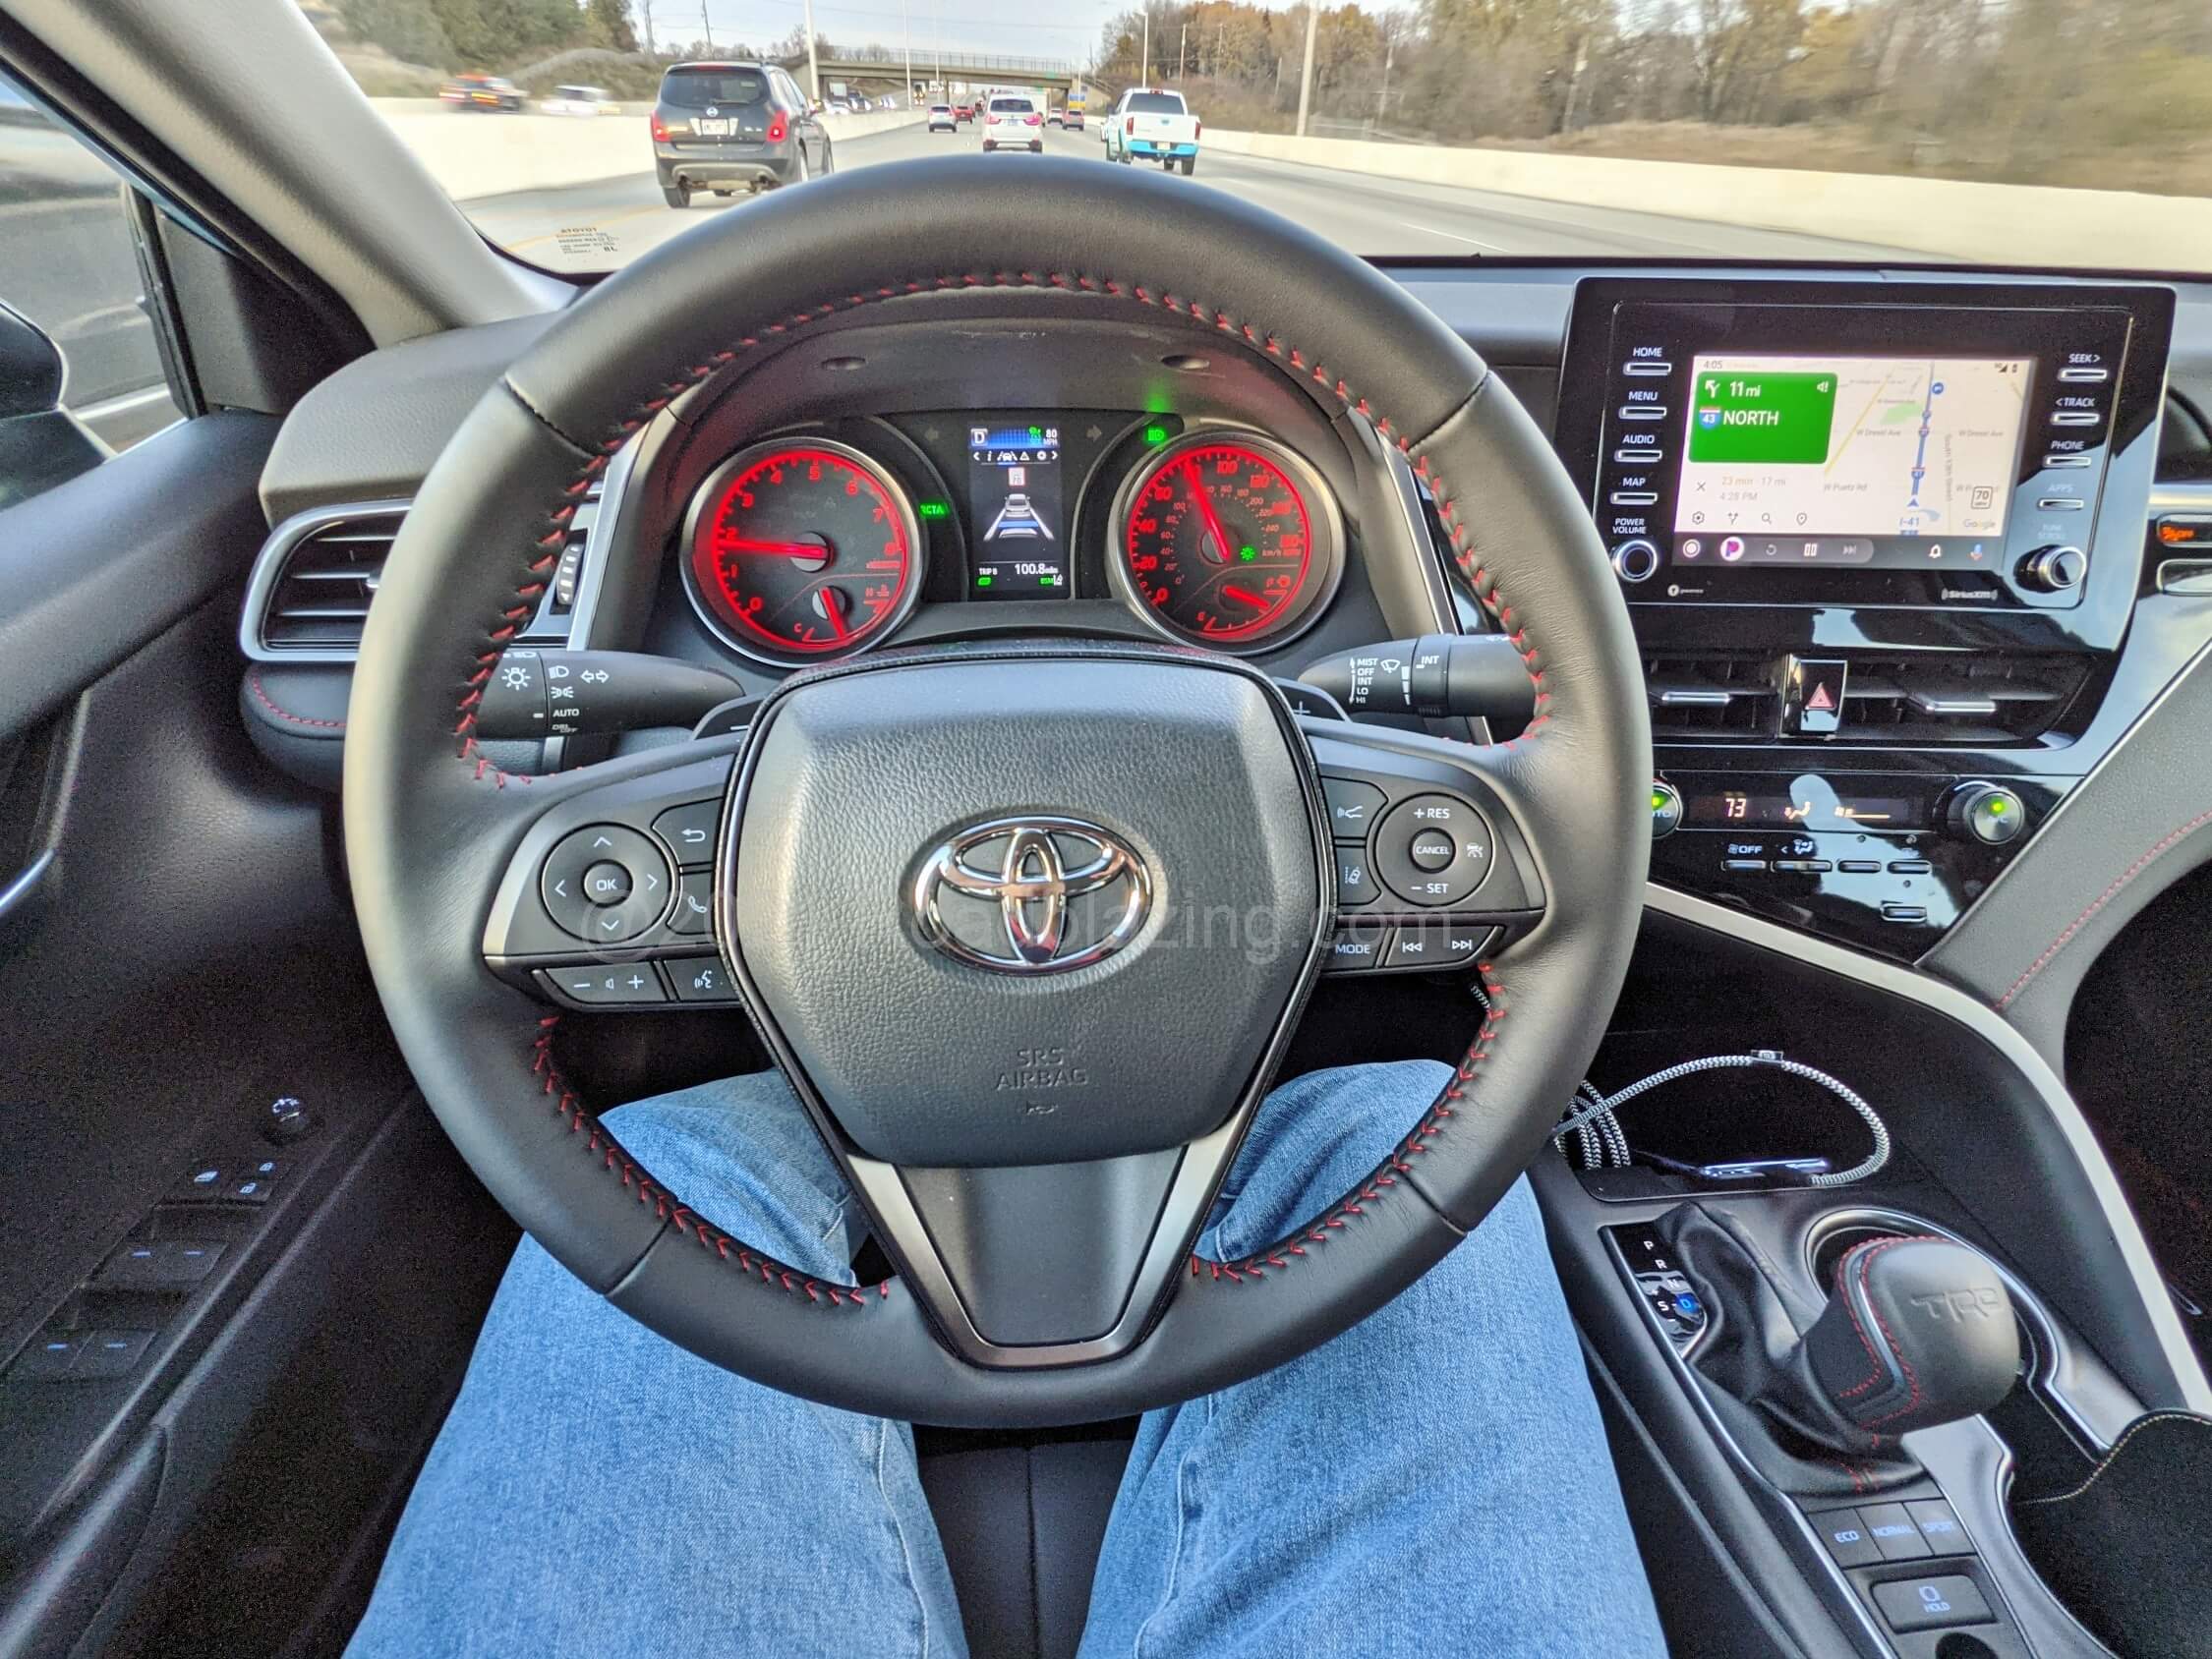 2022 Toyota Camry TRD: Safety Sense 2.5 ADAS is standard as is Android Auto / Apple Car Play projection on the split 7.0" inch touch LCD media display